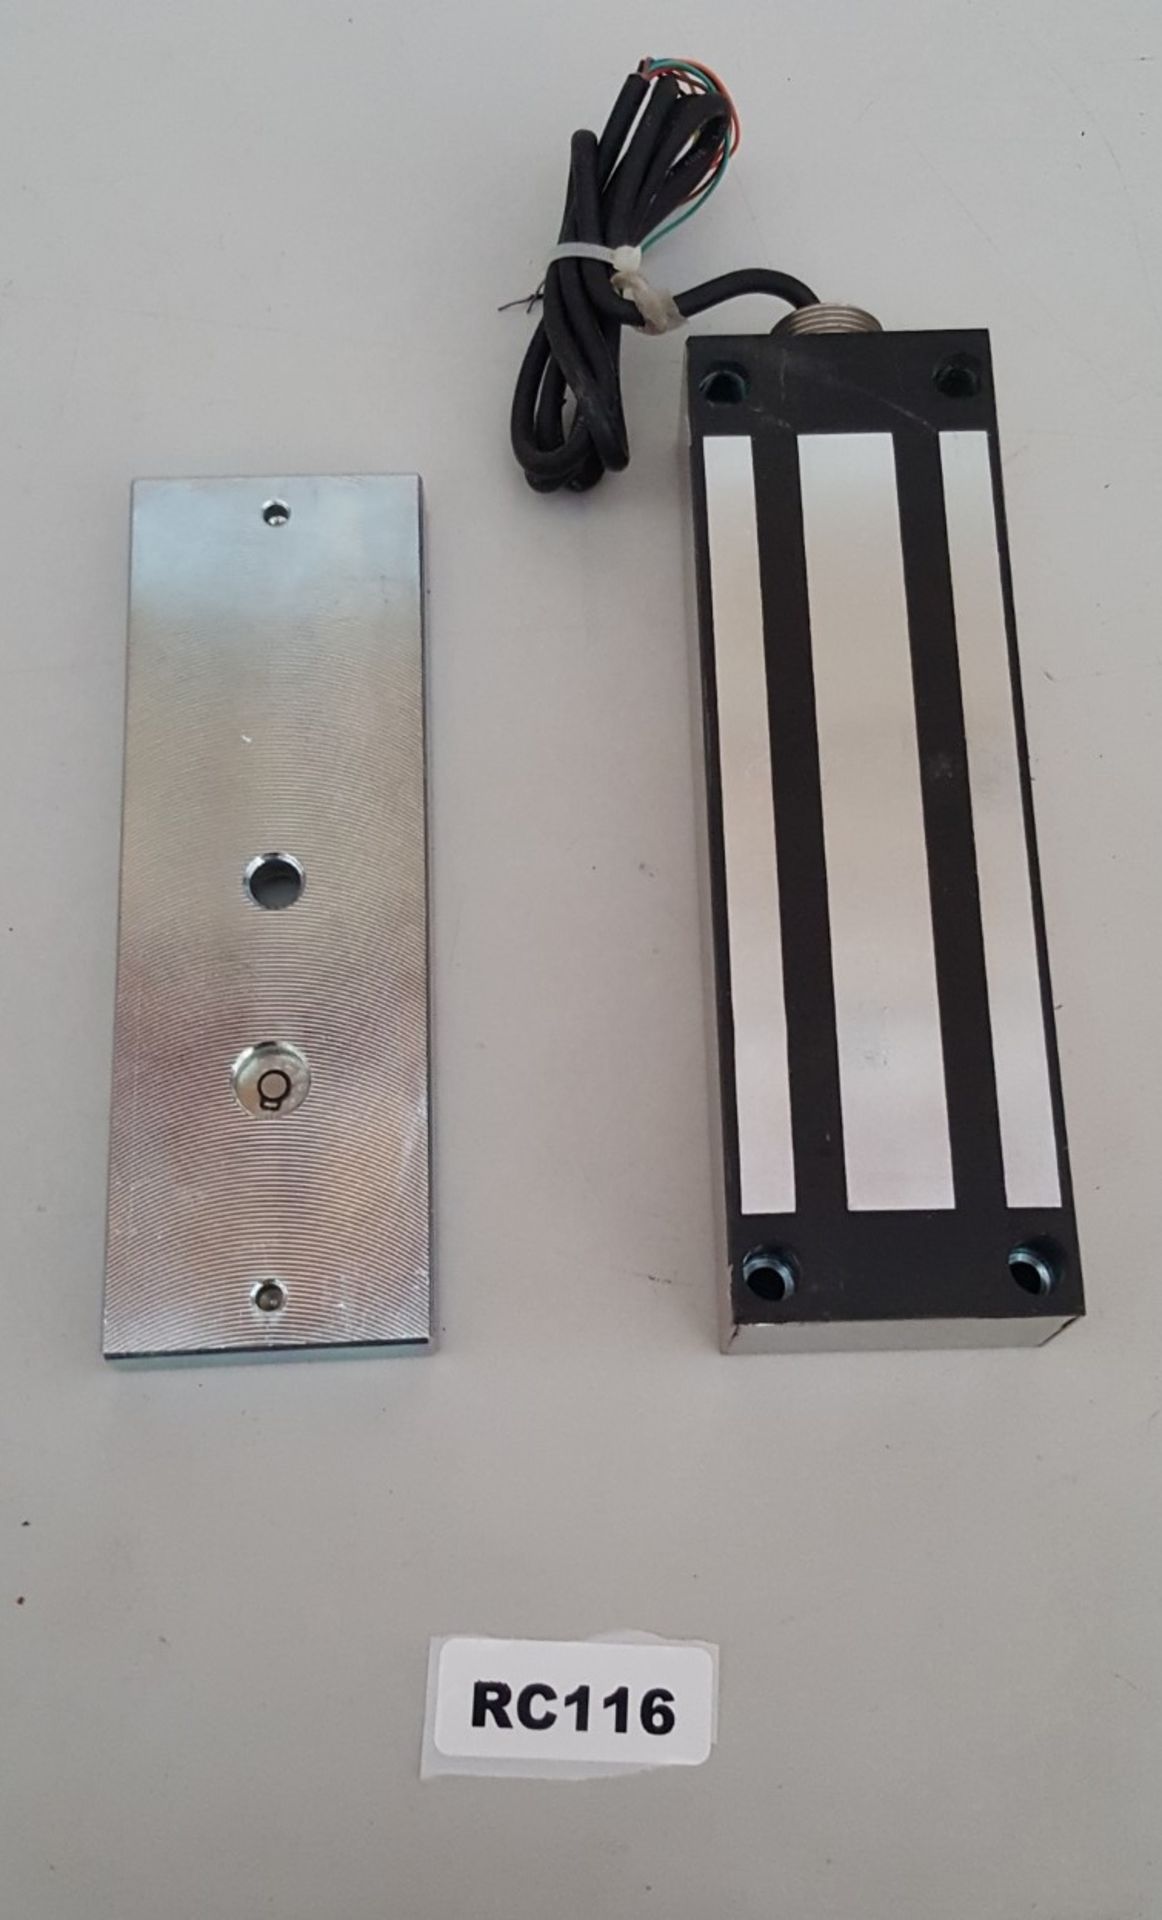 1 x Electromagnetic Outdoor Magnet lock ELS-1200-M - Ref RC116 - CL011 - Location: Altrincham WA14 - Image 2 of 2